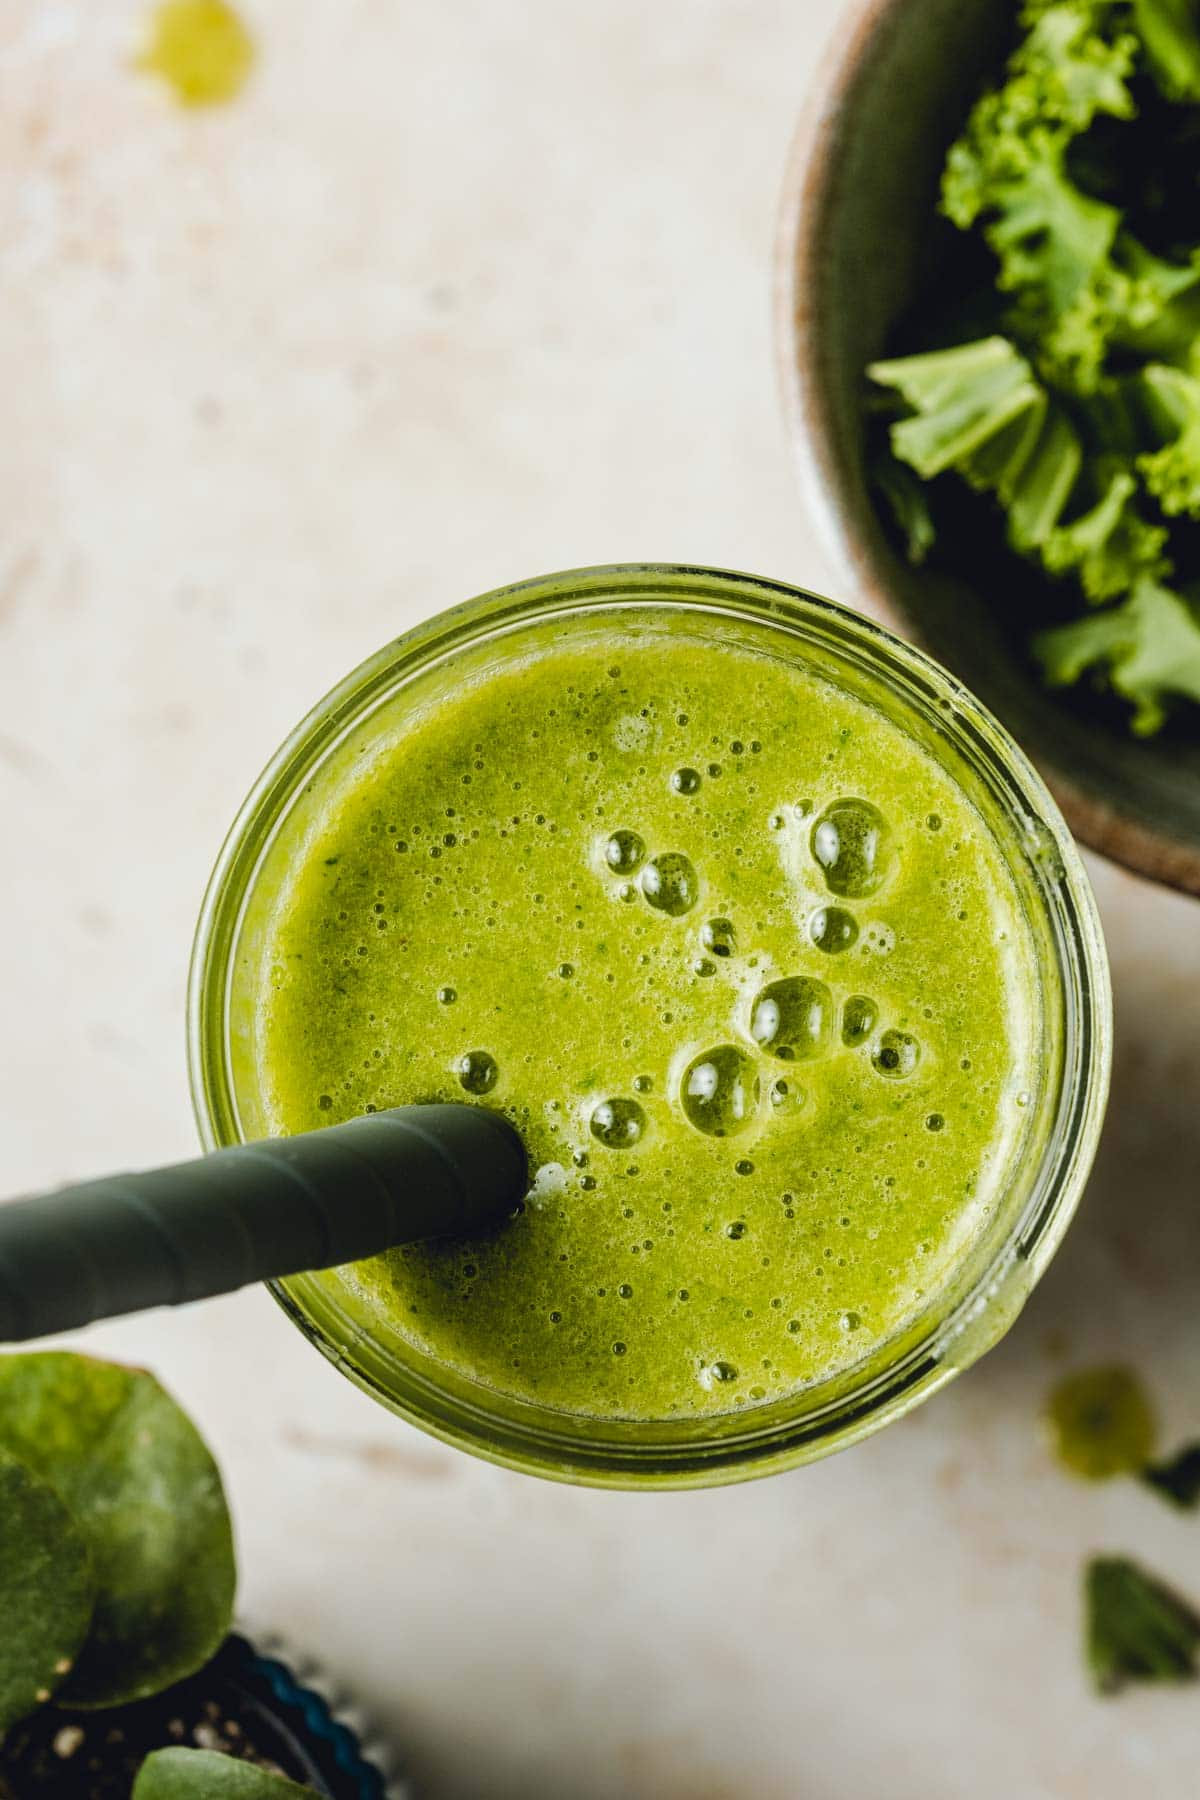 A close-up overhead image of green smoothie with a straw in the middle.